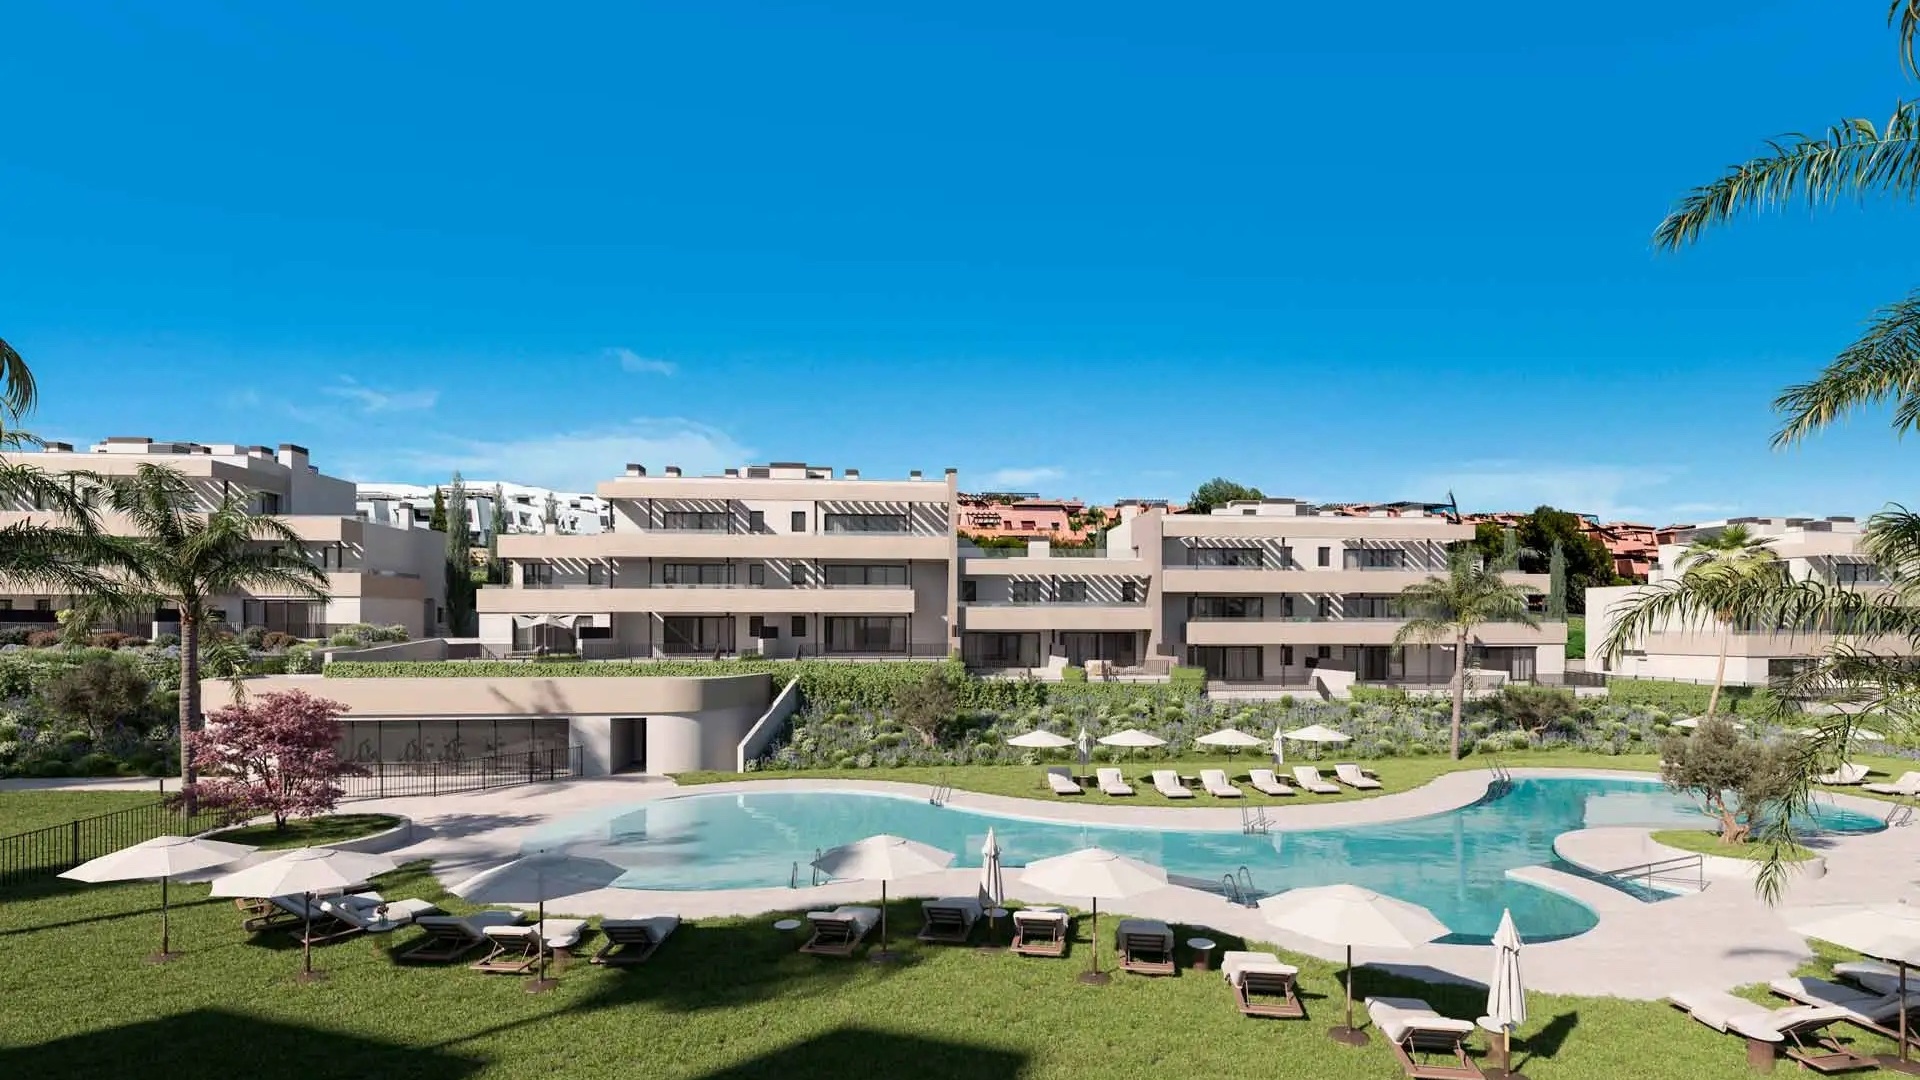 Modern apartments right next to the golf course at Casares Costa